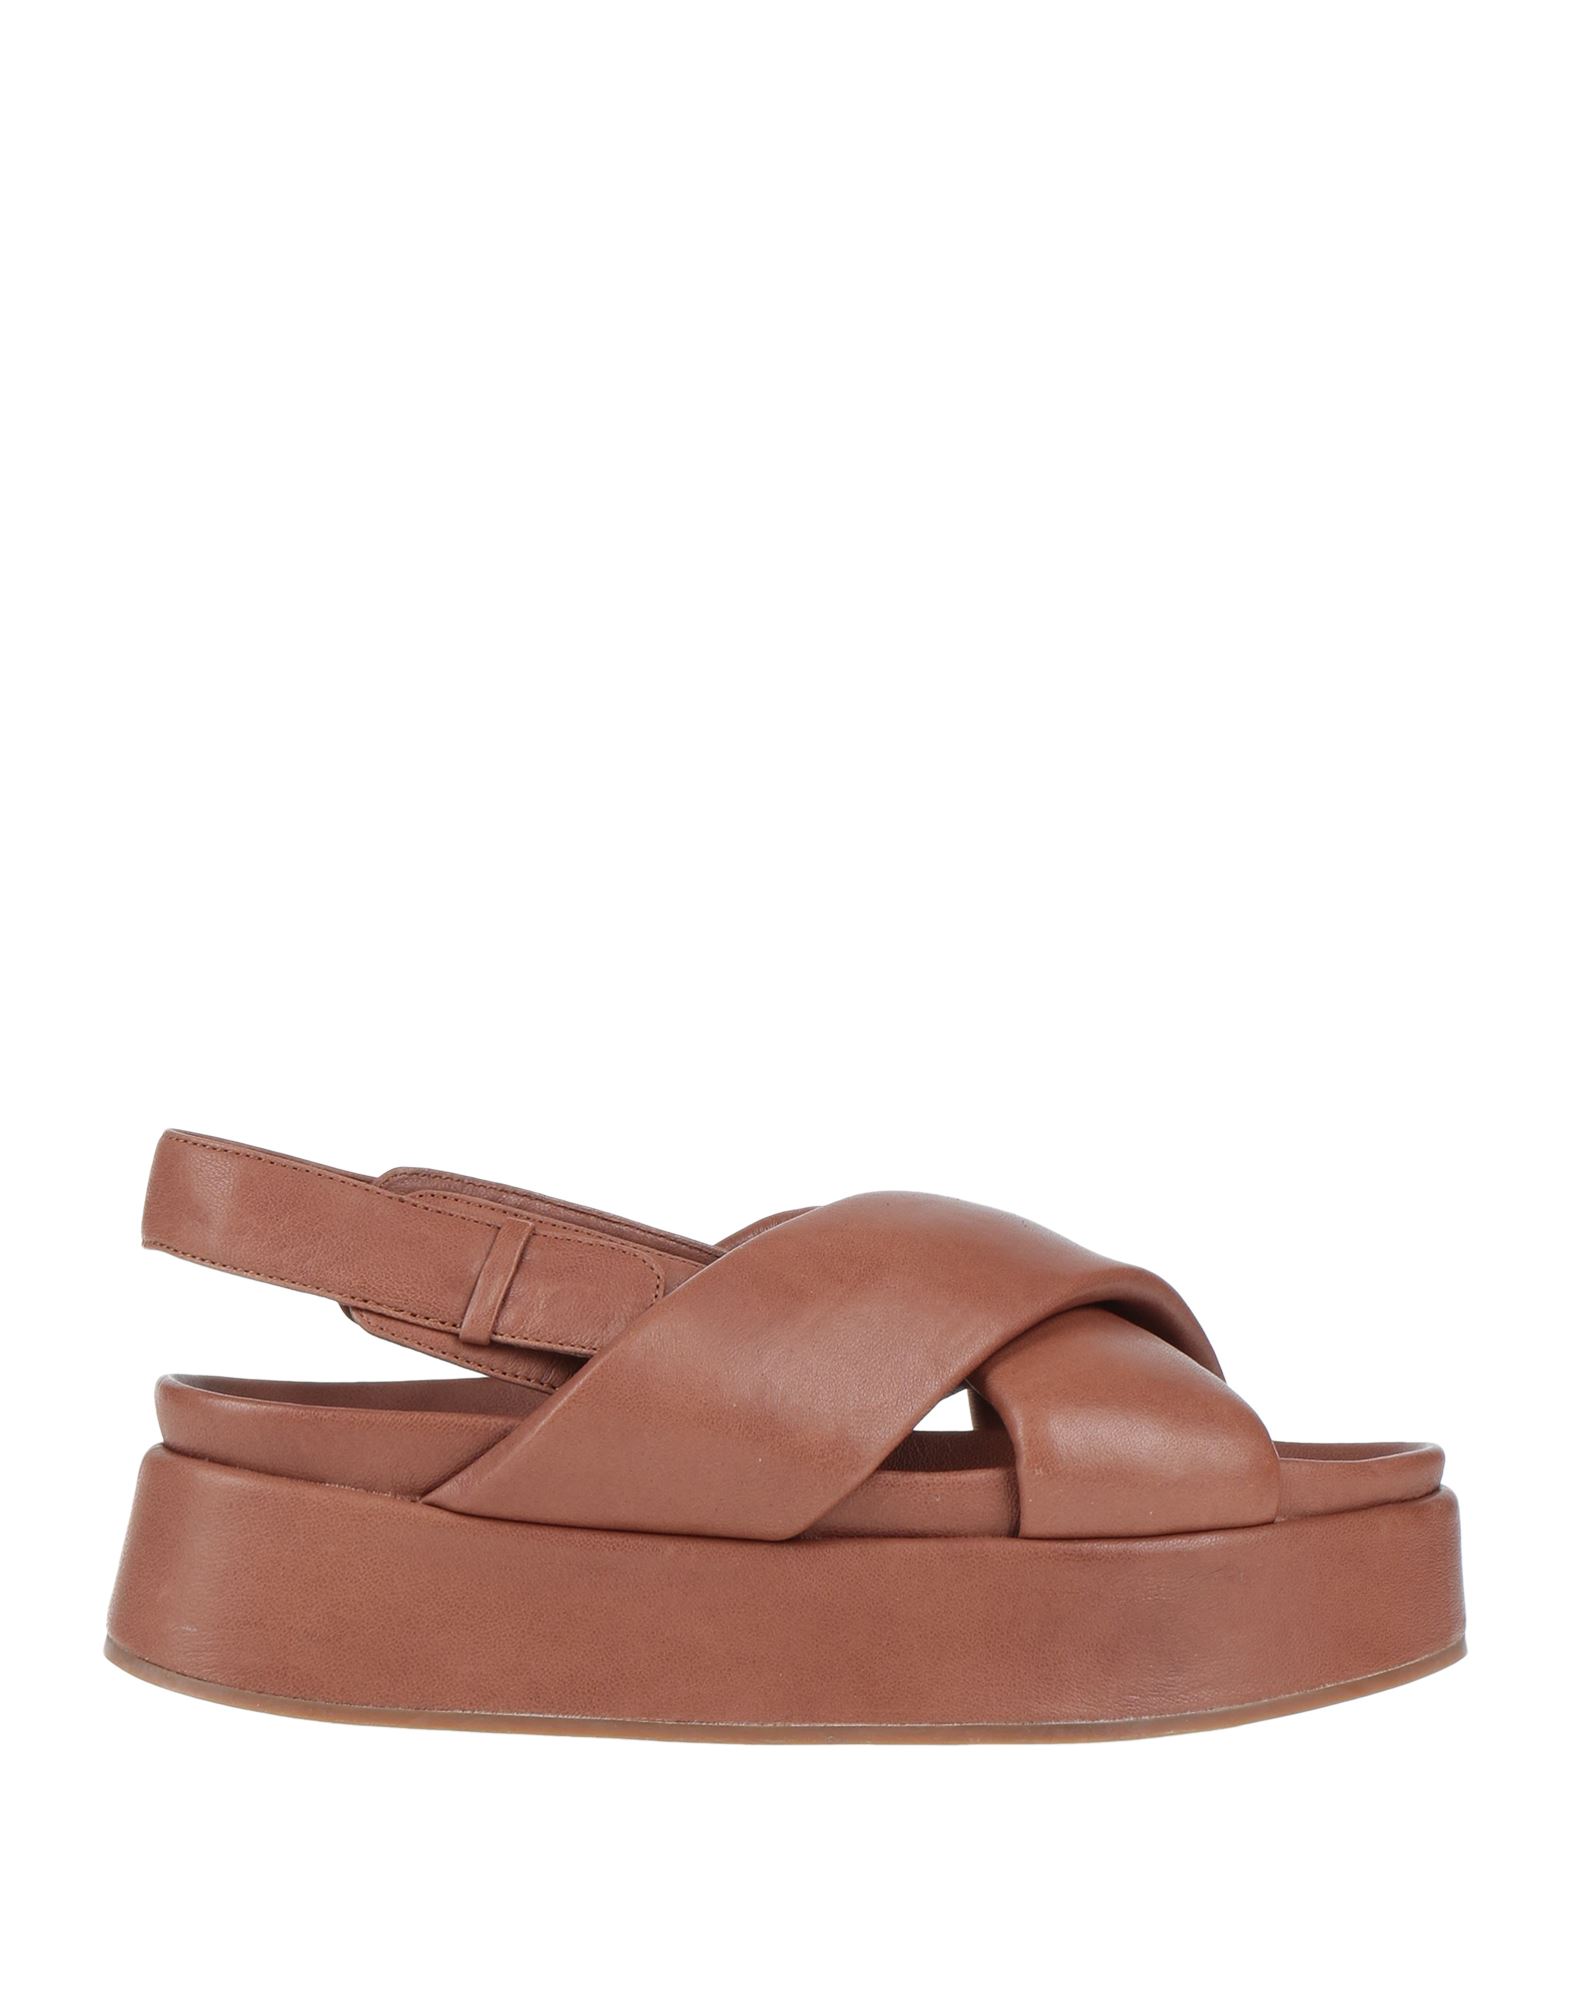 Habille' Italy Sandals In Tan